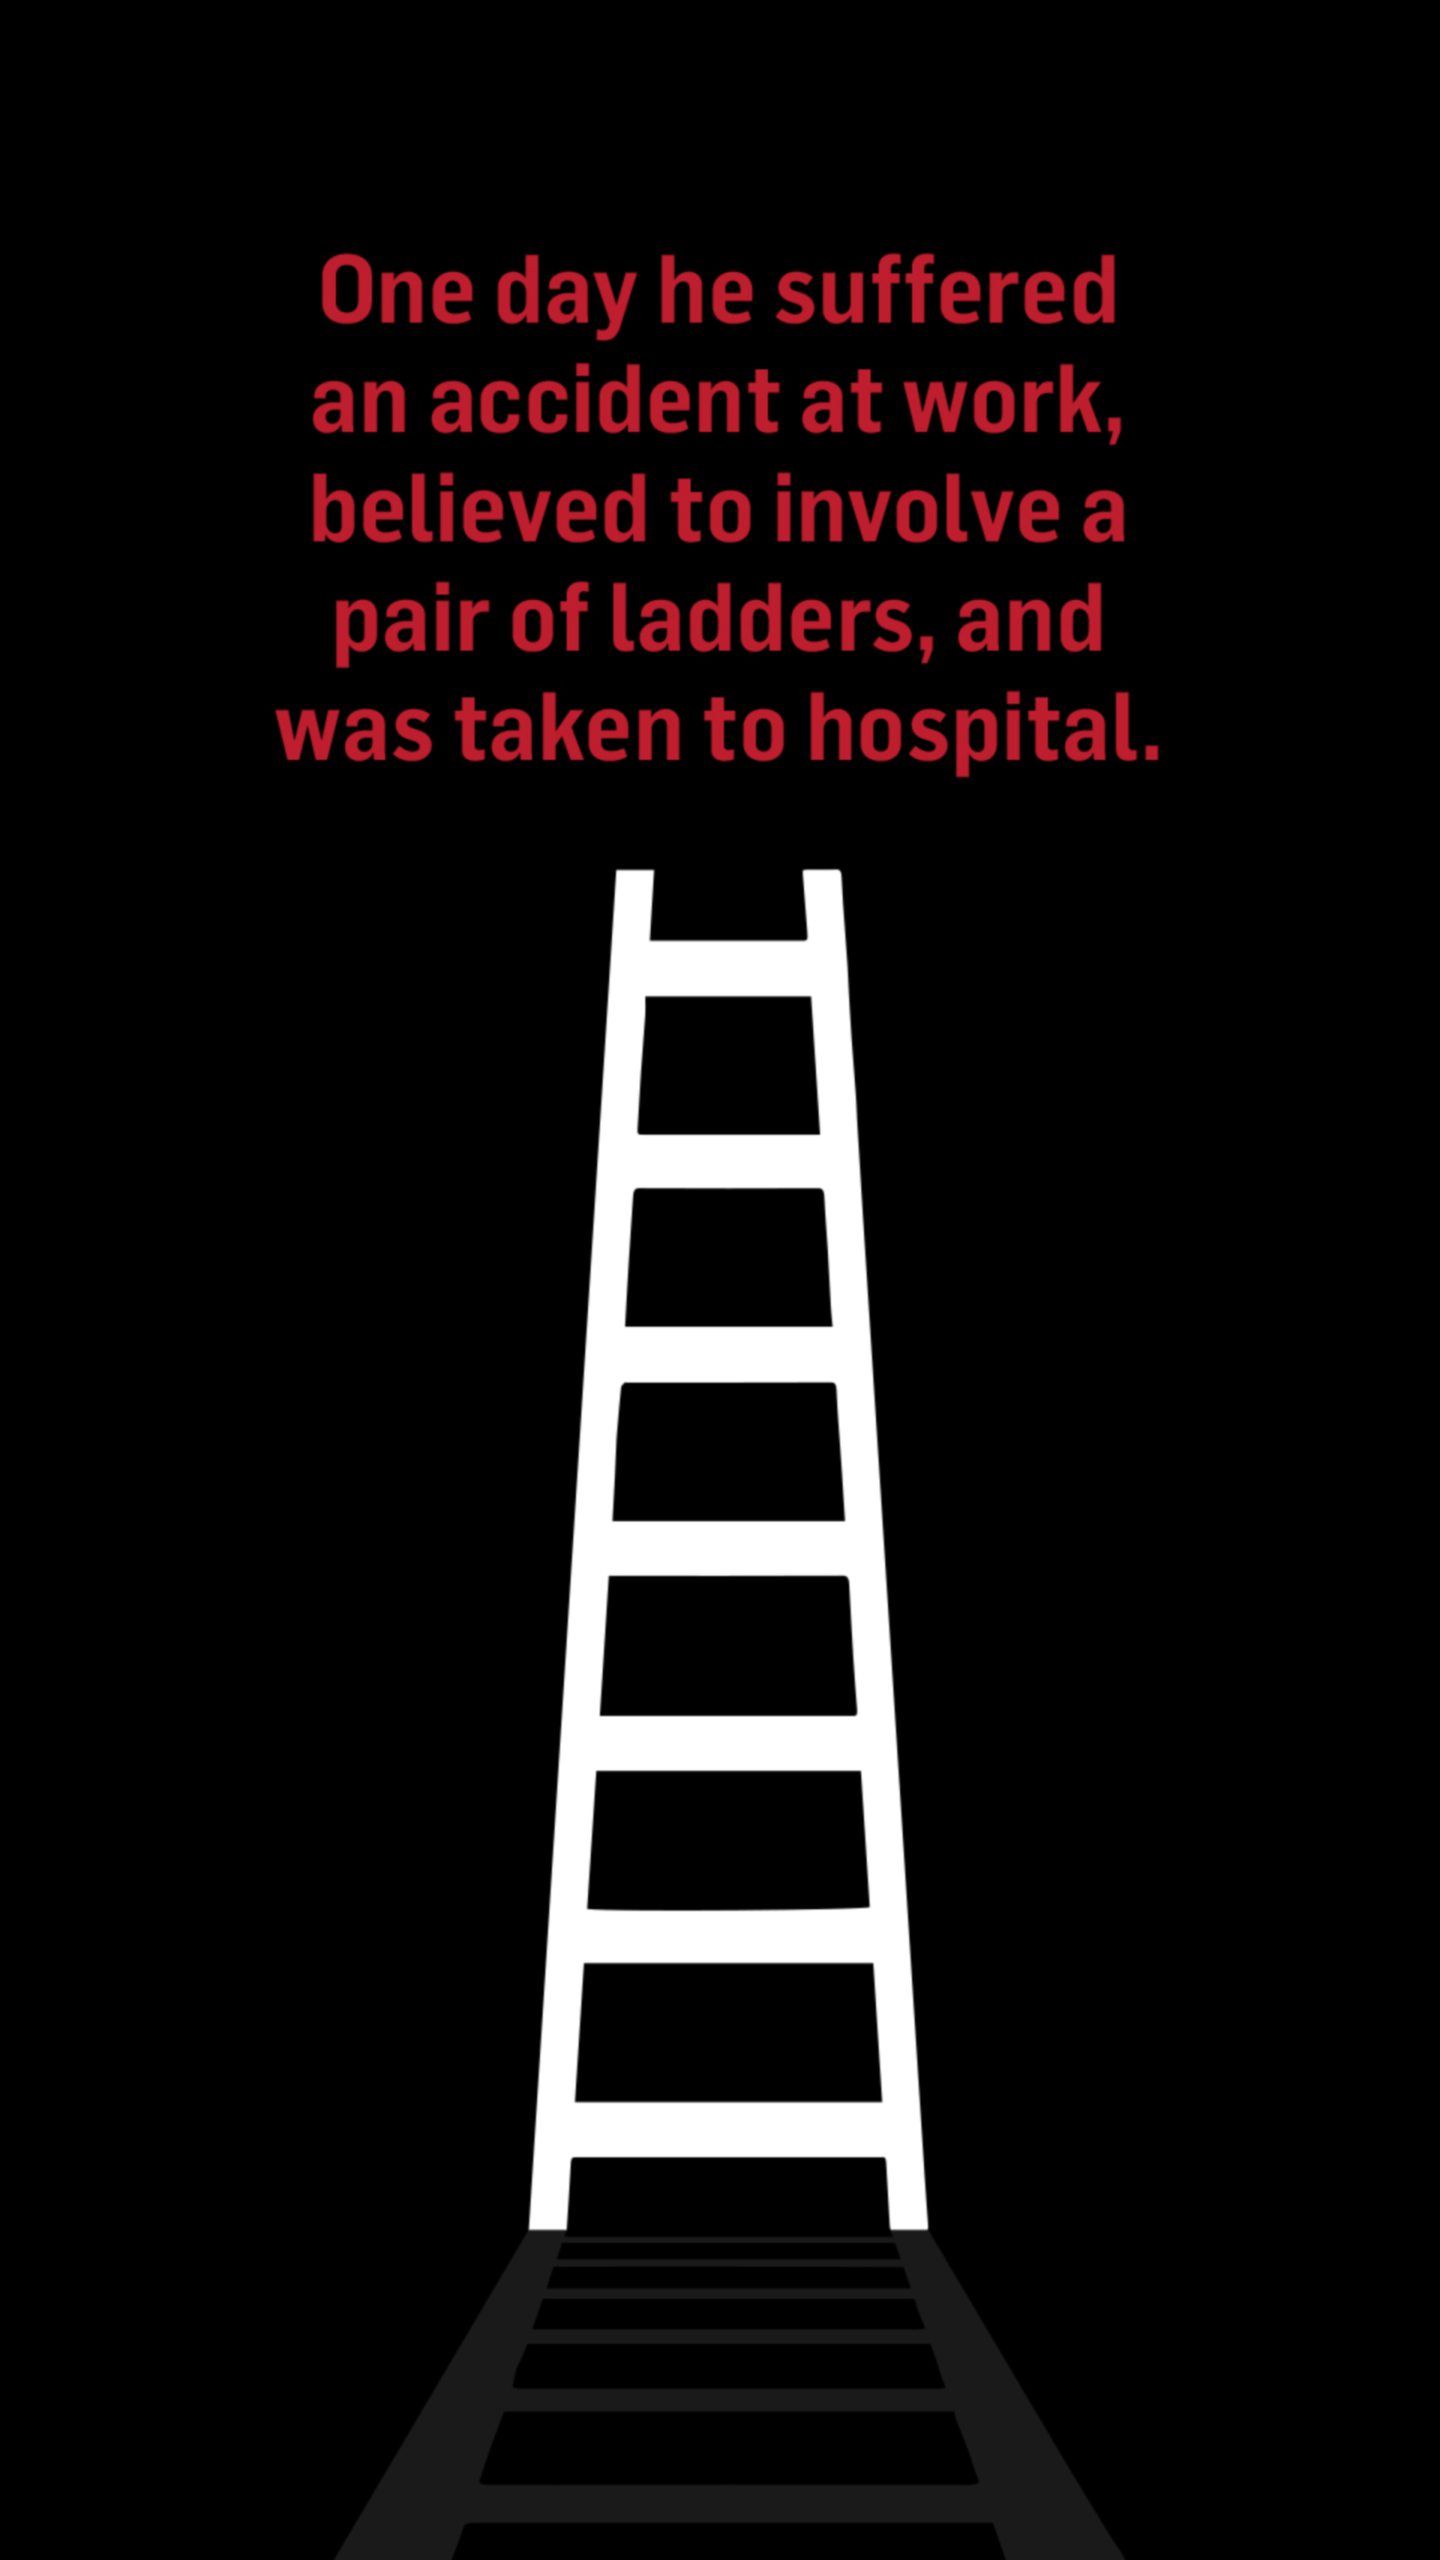 An illustration of a ladder with the words: One day he suffered an accident at work, believed to involve a pair of ladders, and was taken to hospital.